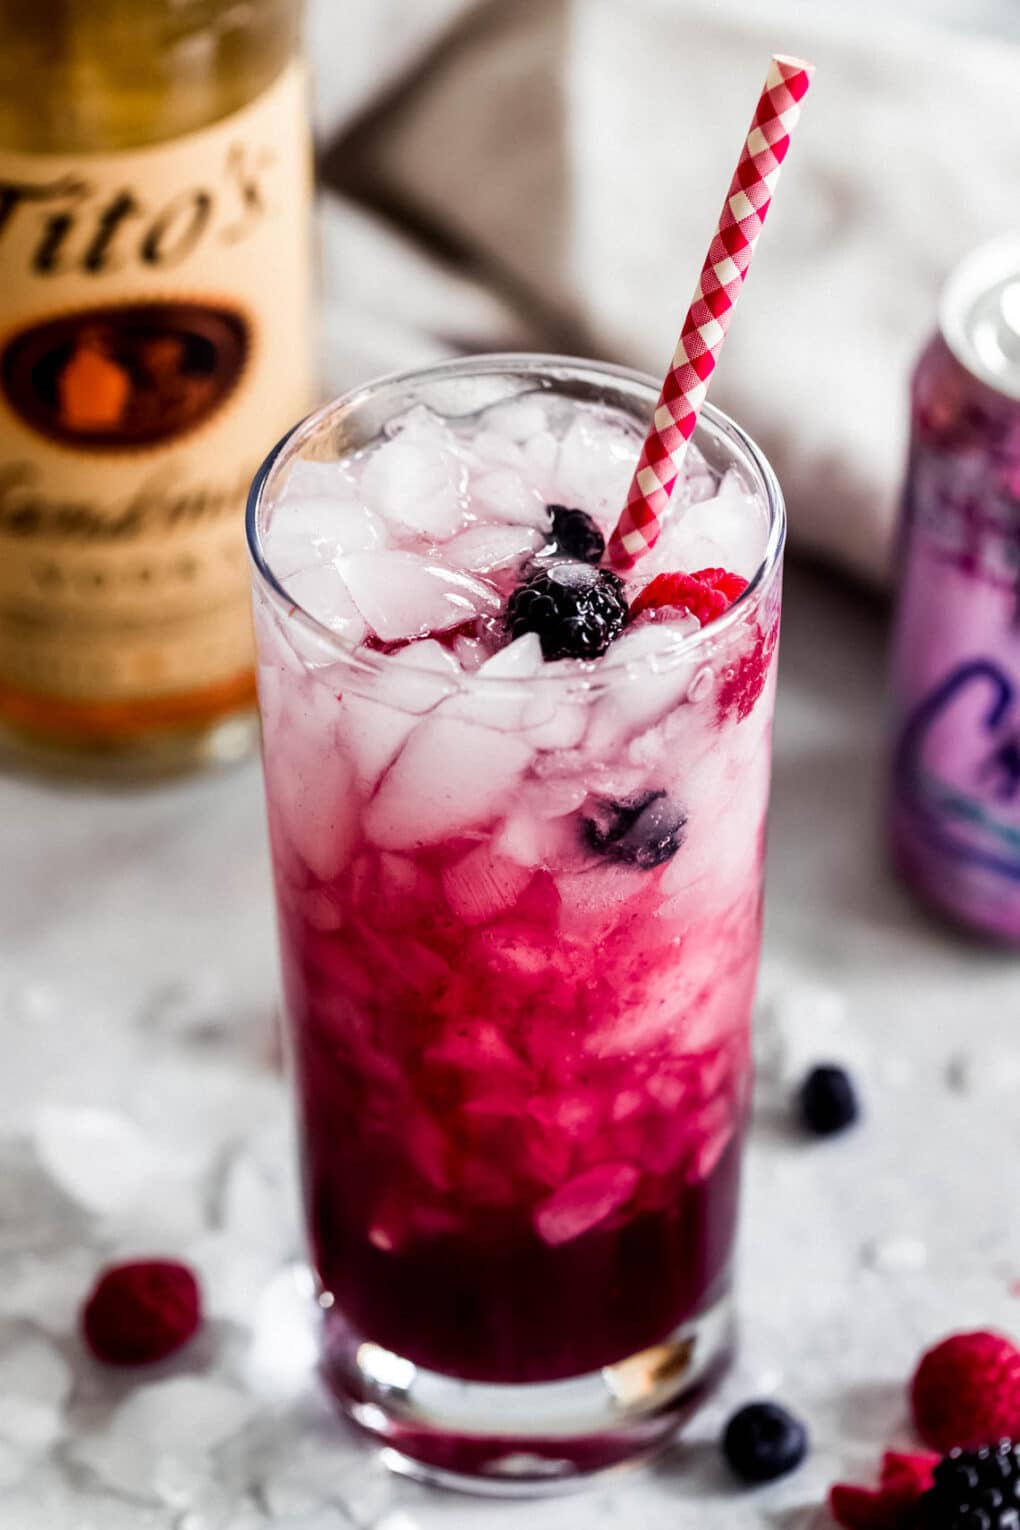 Berry La Croix Vodka Smash with a mixed berry garnish and Red and white straw